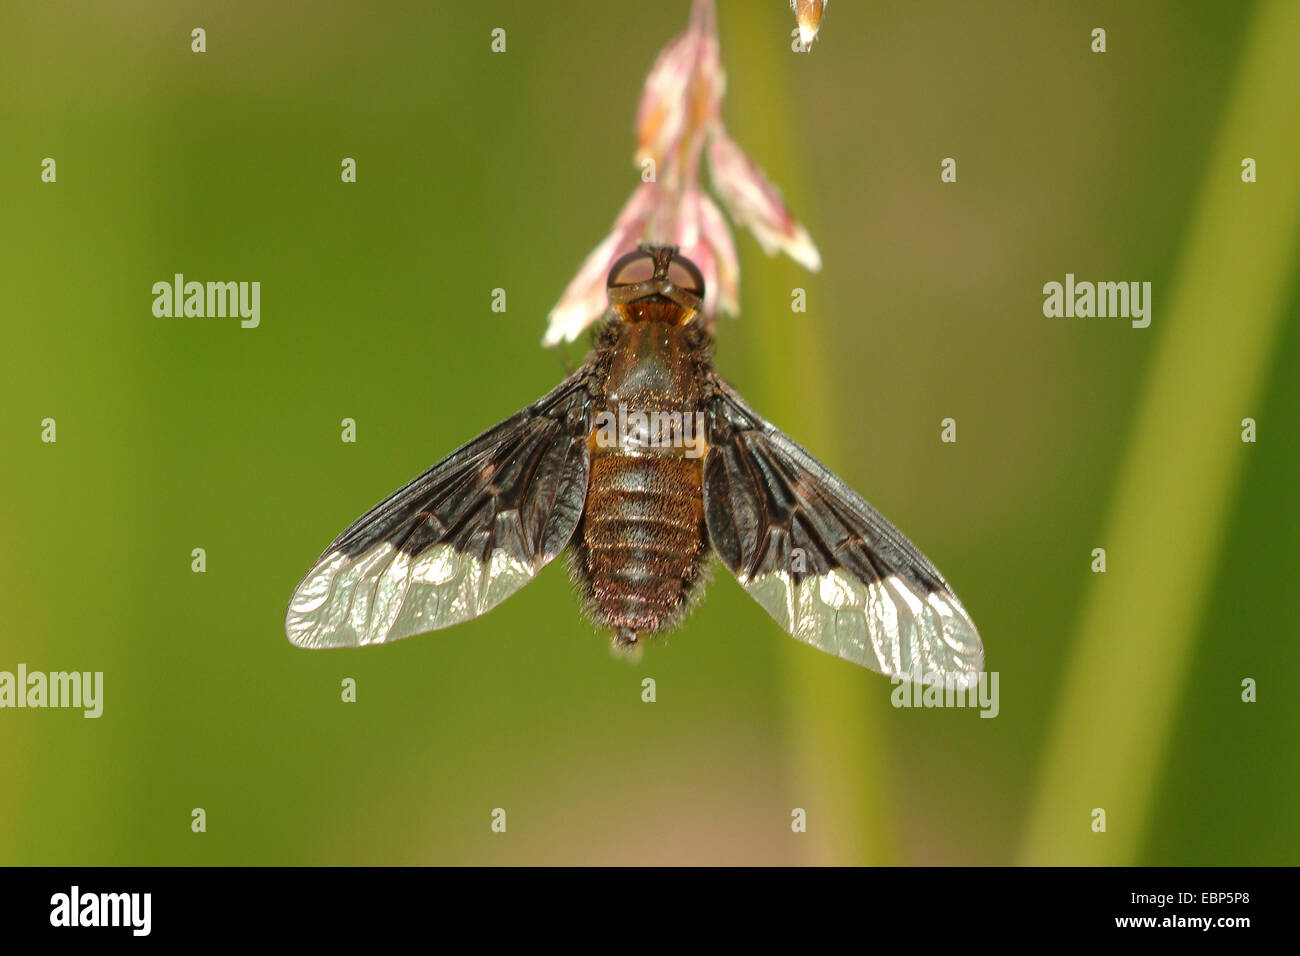 beefly (Hemipenthes morio), on a grass ear, Germany Stock Photo